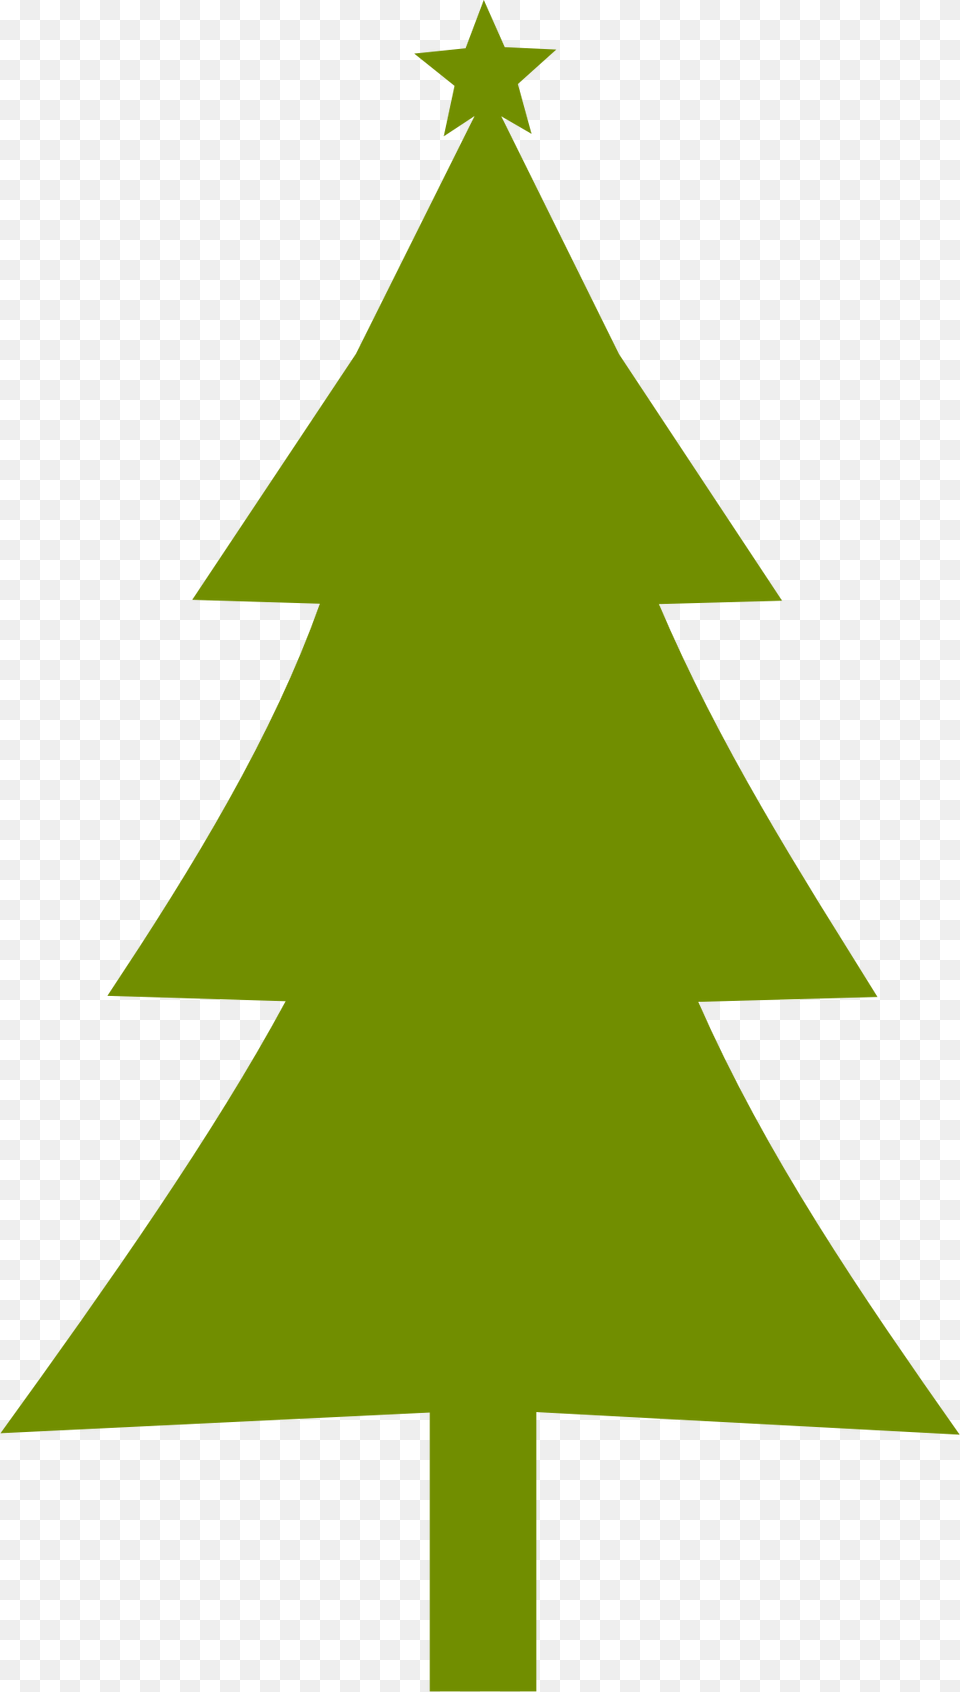 Modern Template Tree Template Tree Tree Outline Coloring, Green, Plant, Fir, Christmas Png